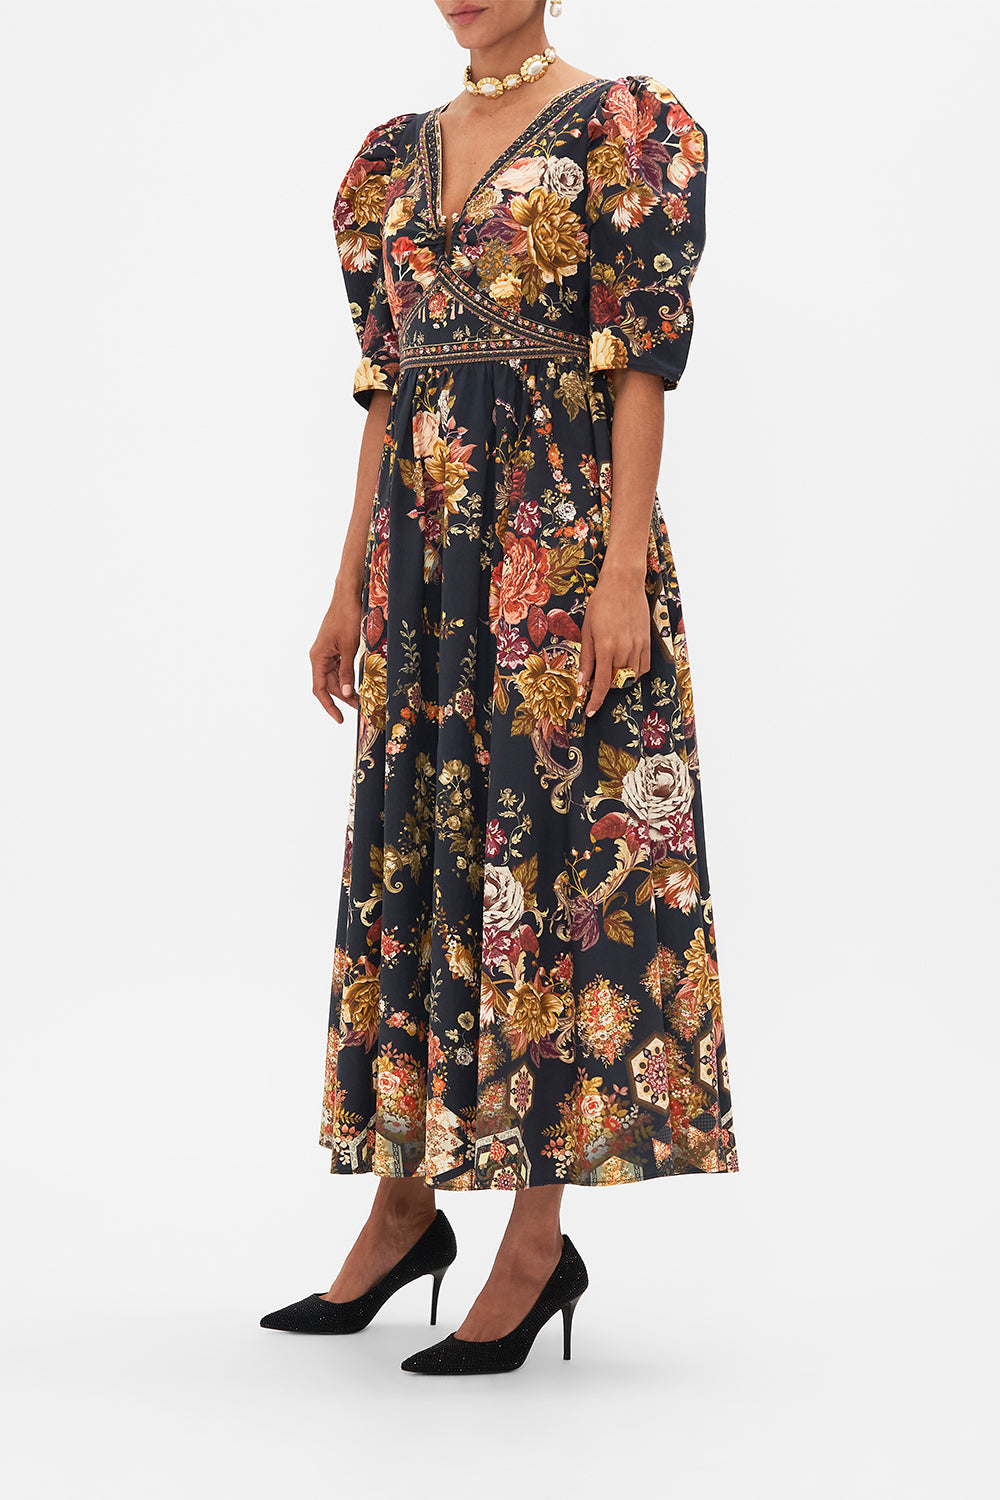 CAMILLA Floral Puff Sleeve Long Dress with Hardware in Stitched in Time